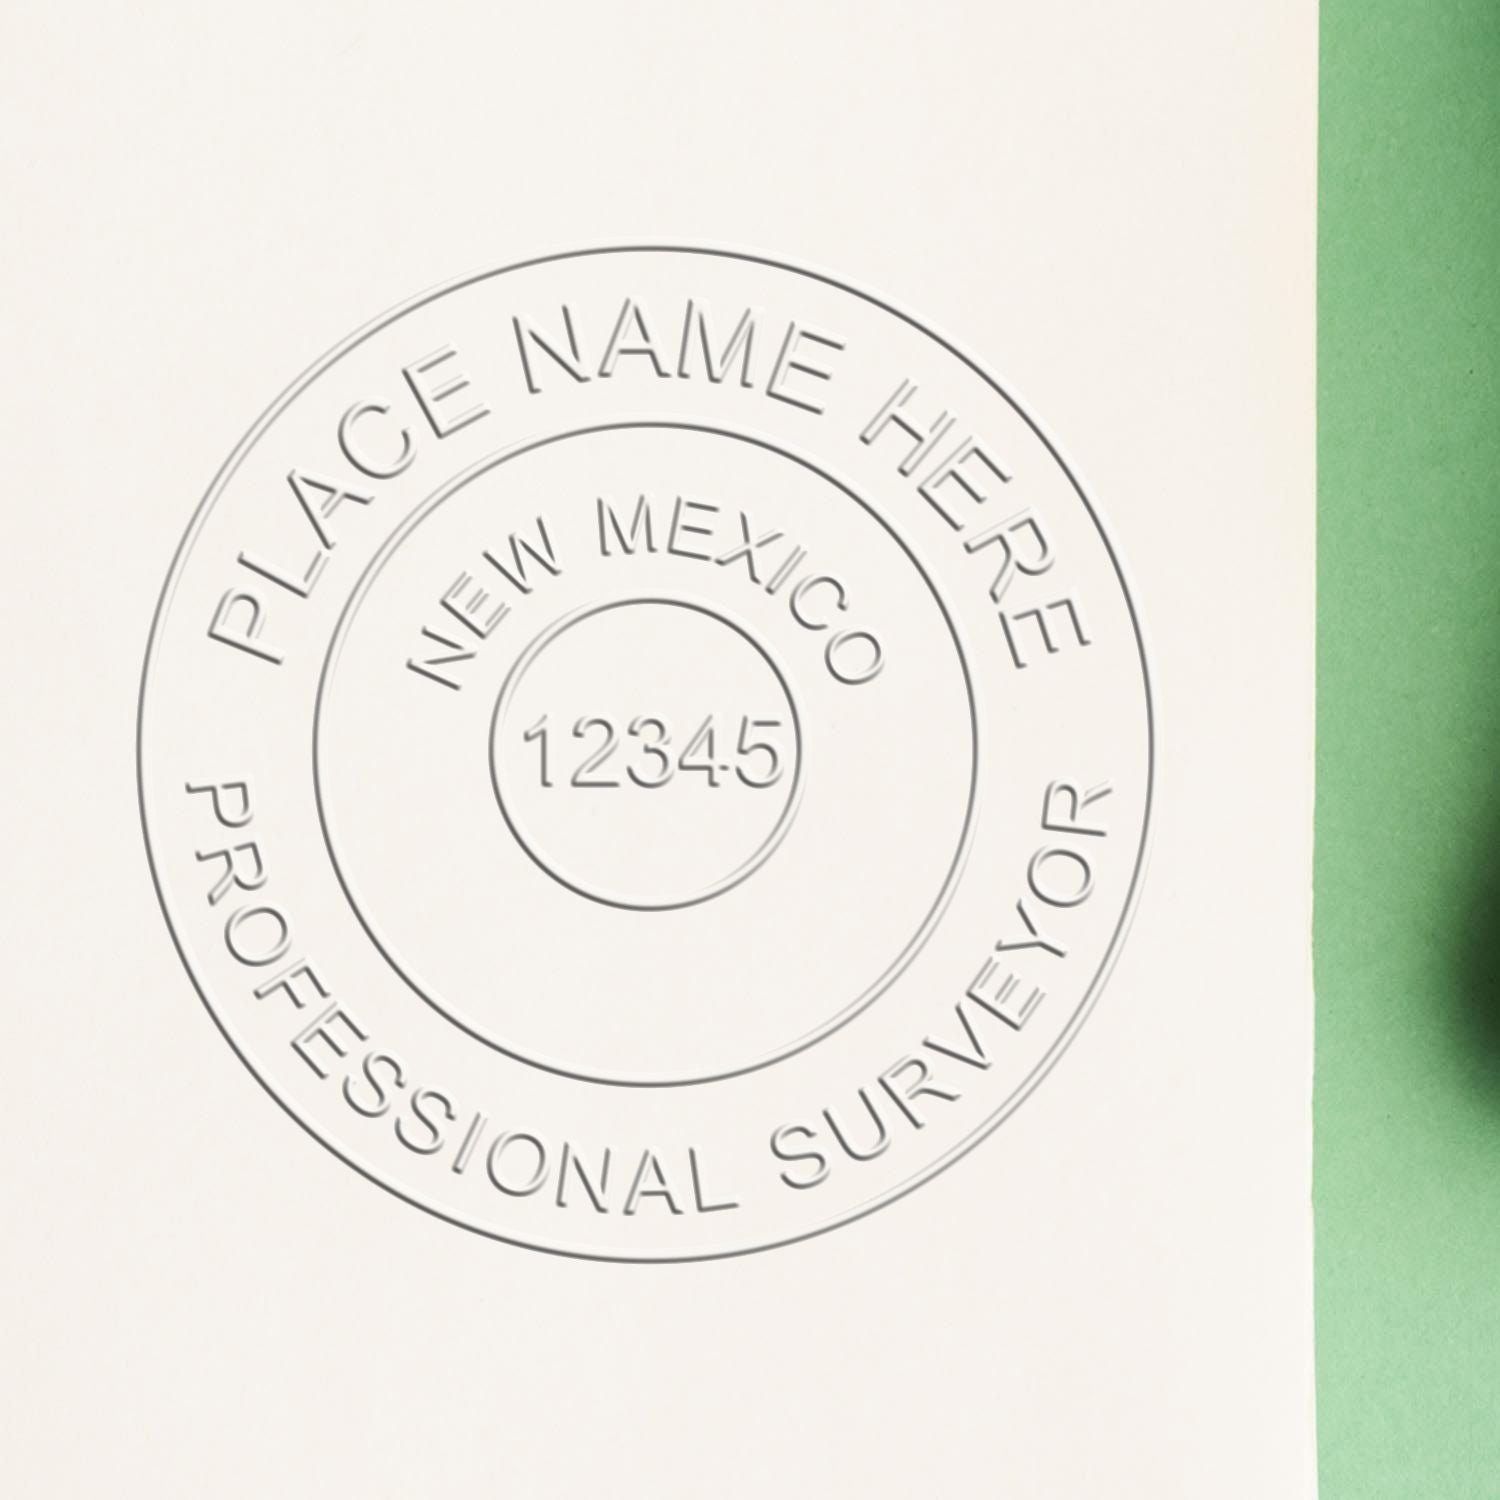 A stamped impression of the Long Reach New Mexico Land Surveyor Seal in this stylish lifestyle photo, setting the tone for a unique and personalized product.